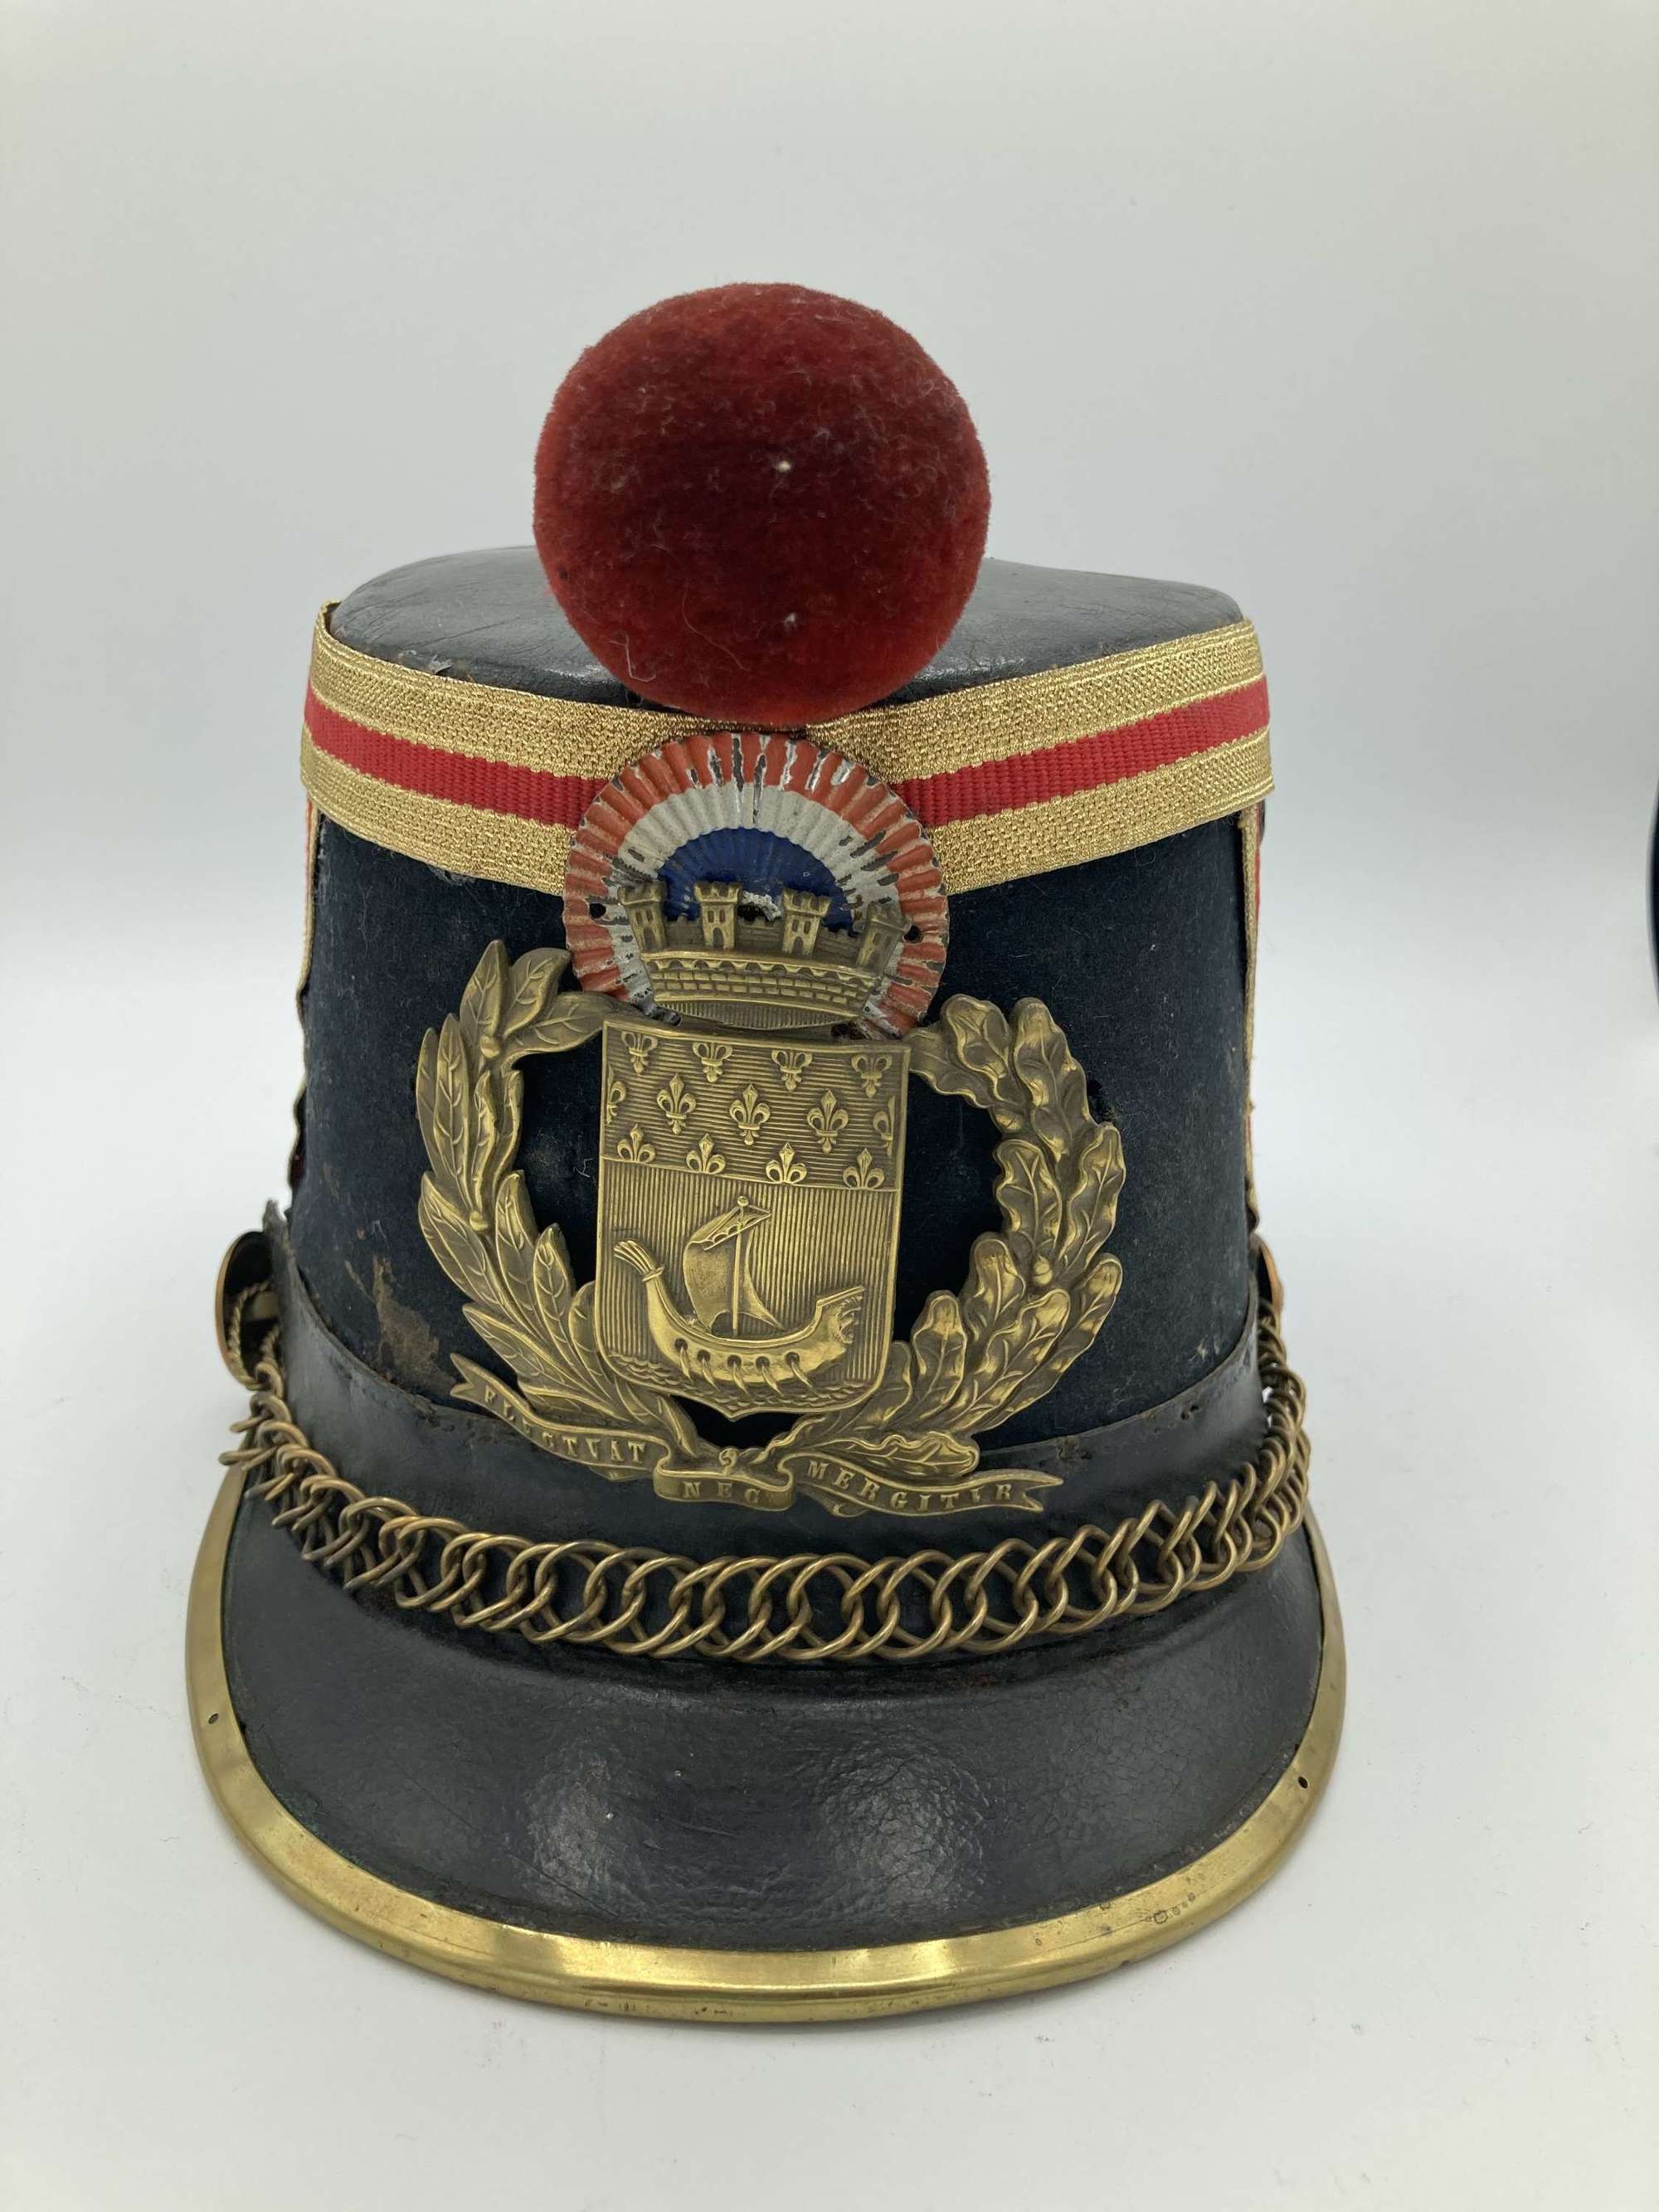 A French Imperial Guard Shako